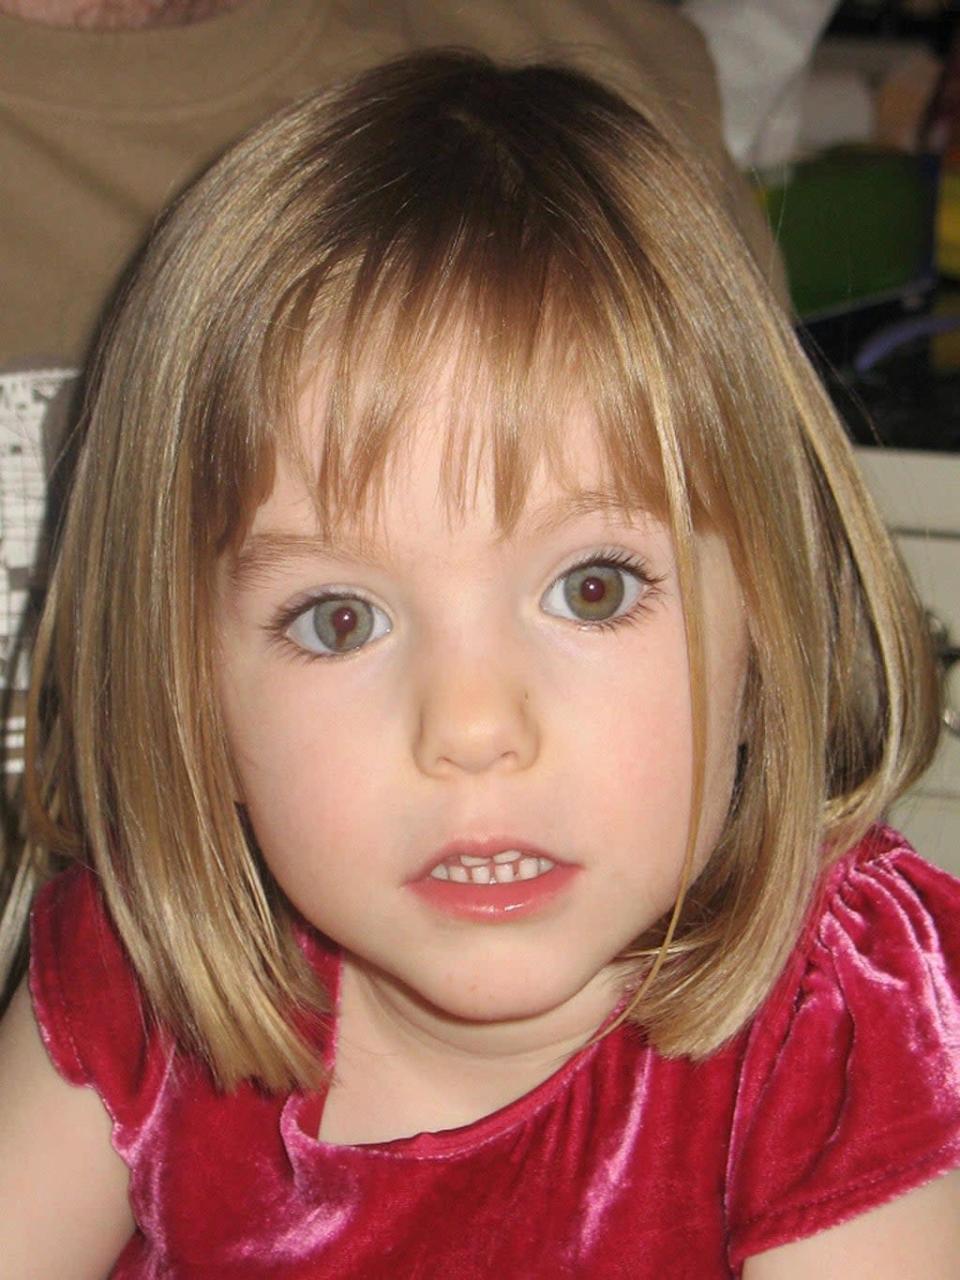 Madeleine McCann disappeared from the apartment in Praia da Luz, Portugal, on May 3 2007 (PA) (PA Media)